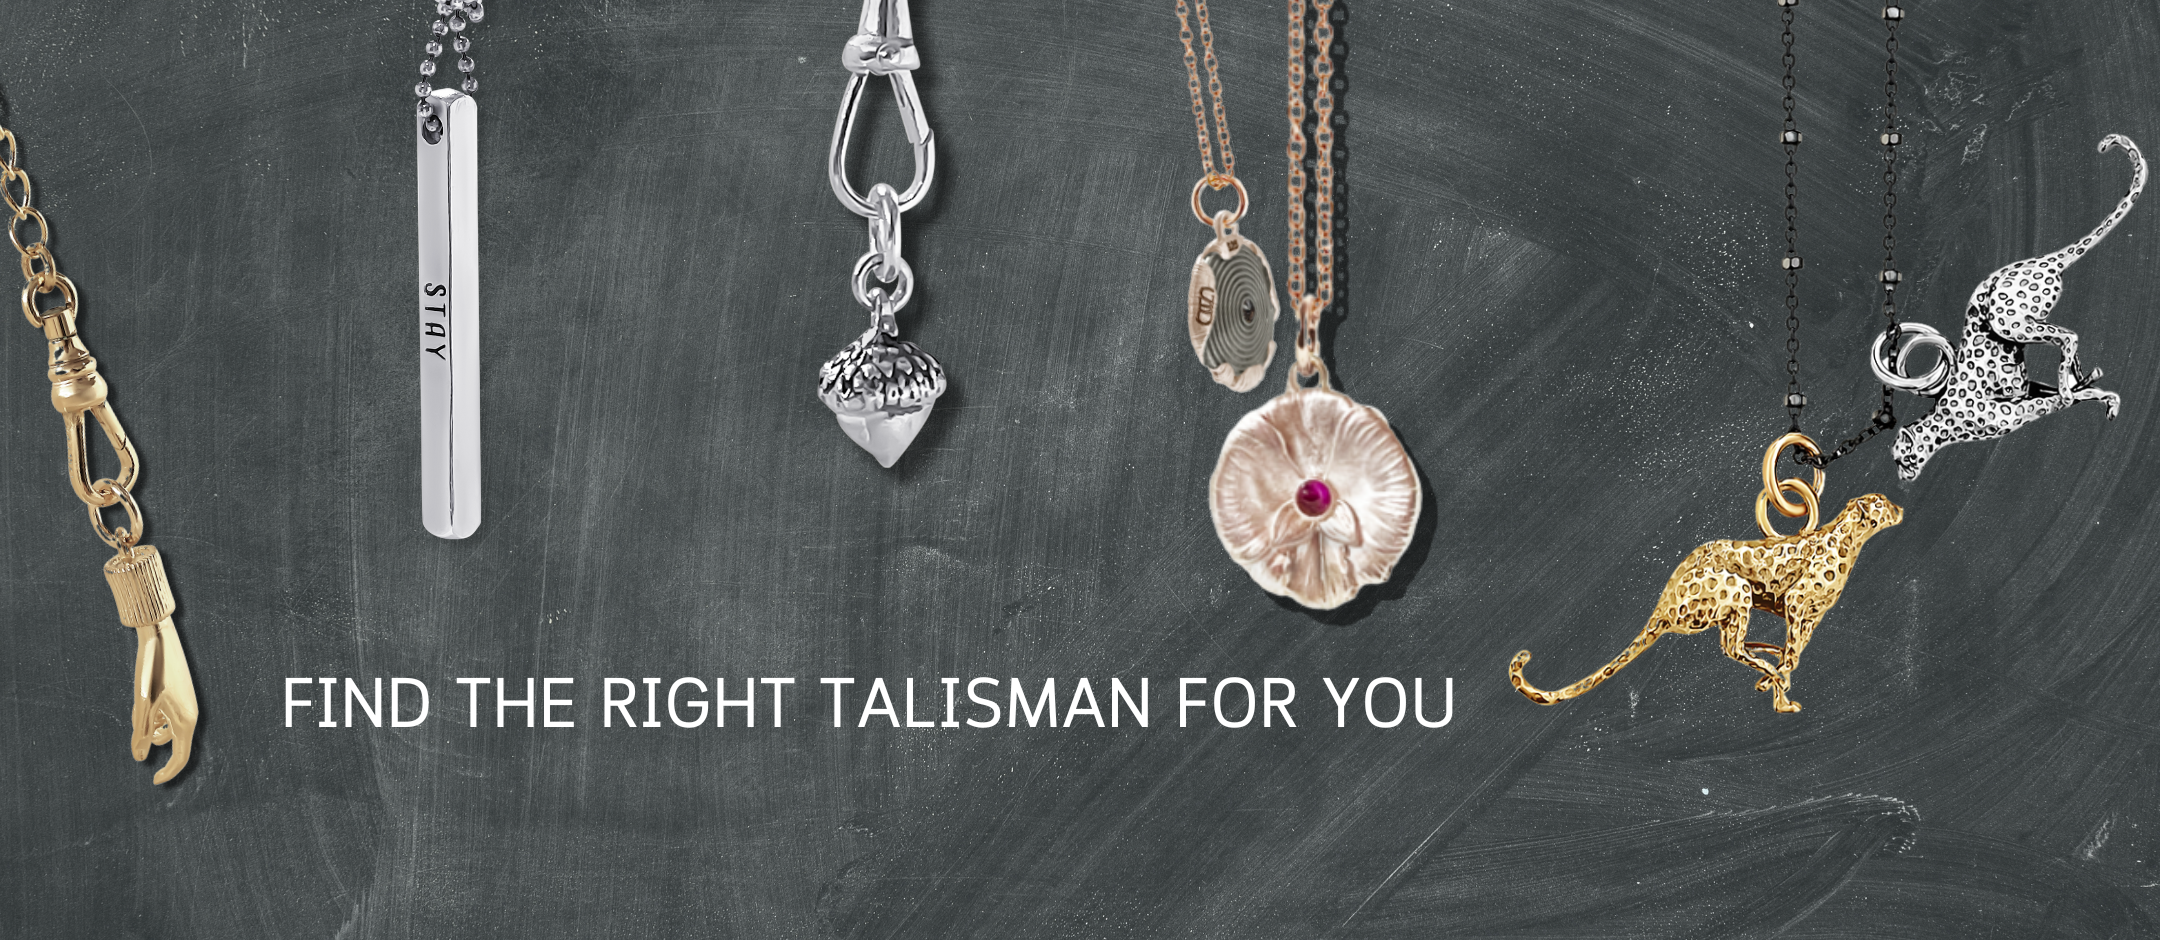 FIND THE RIGHT TALISMAN FOR YOU